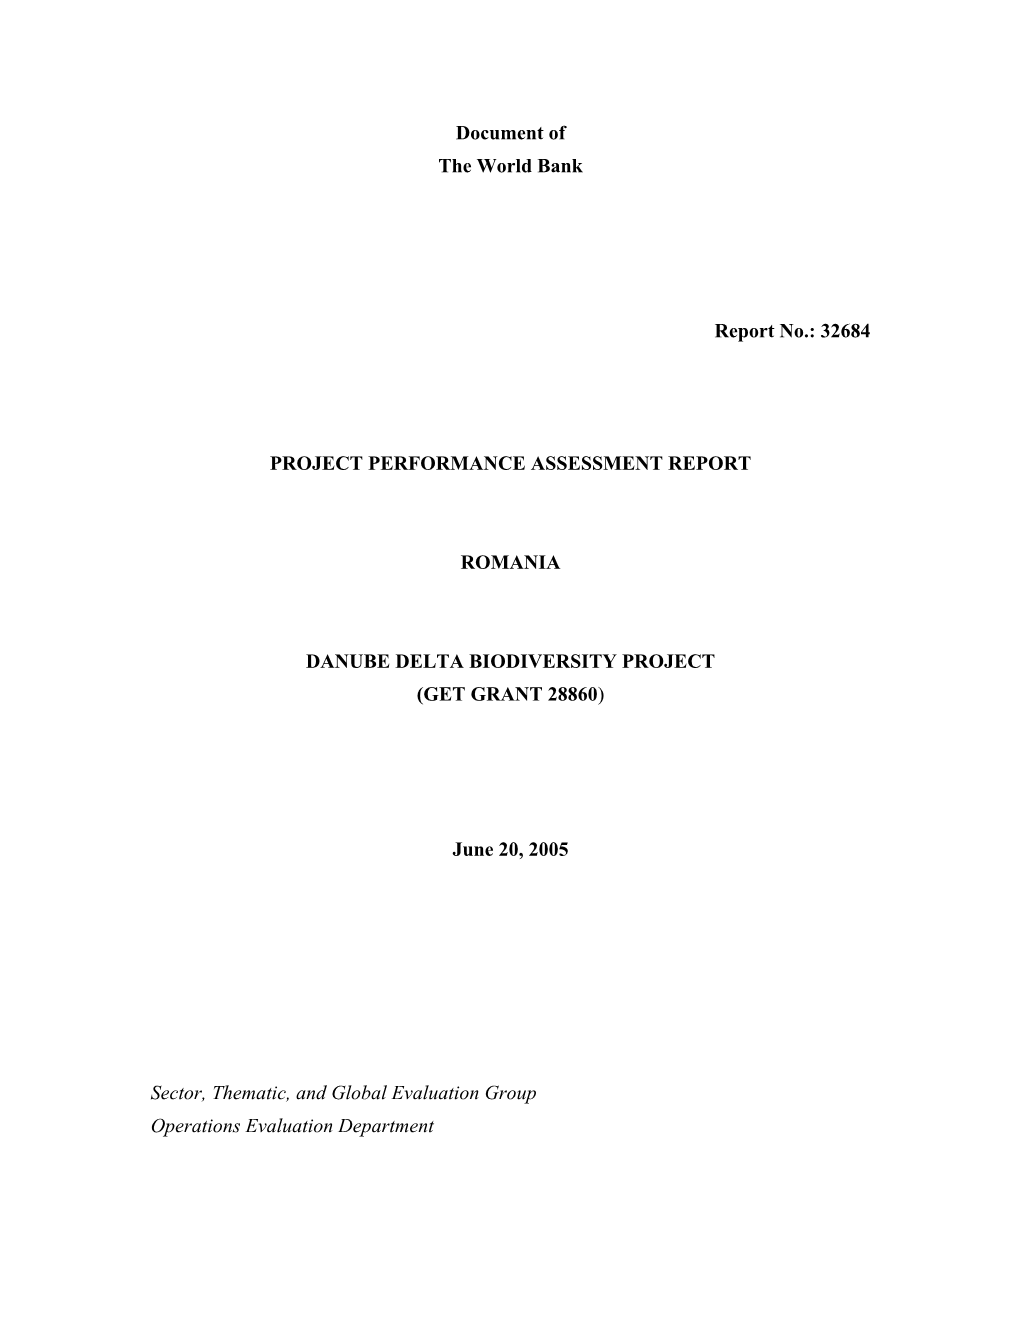 Document of the World Bank Report No.: 32684 PROJECT